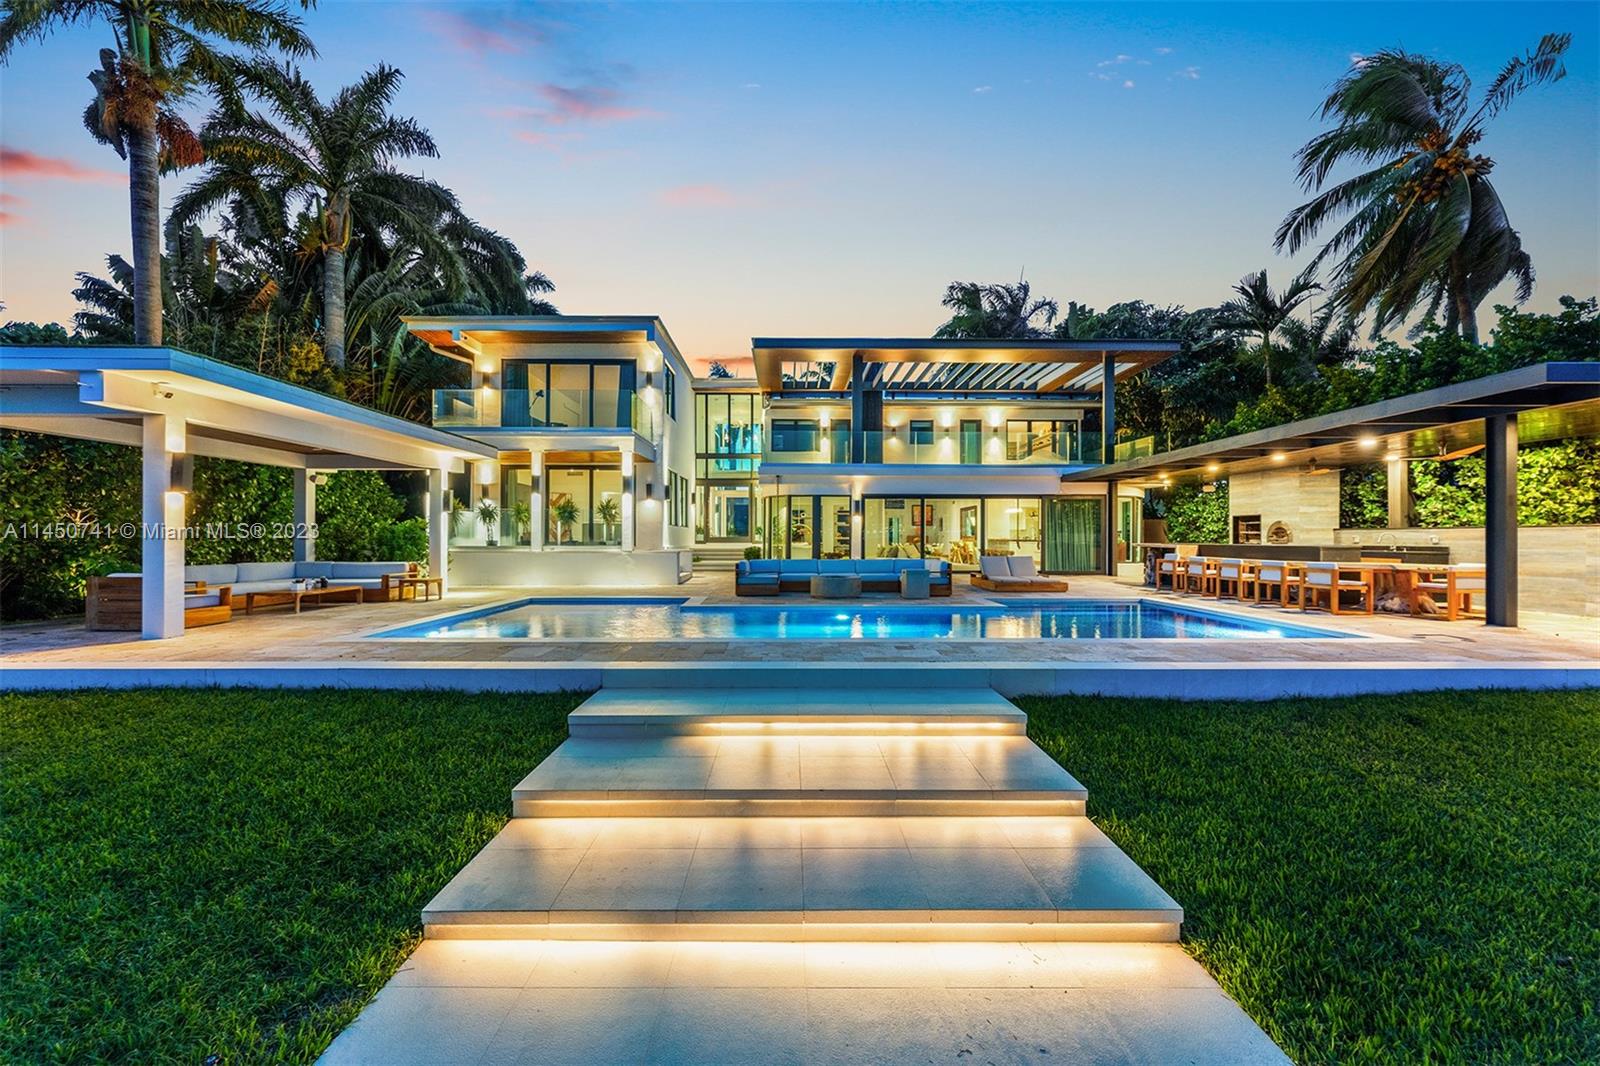 This Magnificent waterfront property on E Rivo Alto Dr. on the Venetian Islands, Miami Beach, offers 90 feet of pristine water frontage, providing breathtaking views & direct access to the beautiful waterways of Miami. The home is filled with natural light making it an amazing space for the Art Collector. Enjoy true indoor/outdoor living with an open floor plan that seamlessly connects your living spaces to the stunning outdoors & unobstructed views of Biscayne Bay. Host unforgettable gatherings with a new summer kitchen with Brazilian-style BBQ & Pizza oven, and Gas fireplaces both poolside & Dockside, creating a magical atmosphere for nighttime entertaining.  The property sits on a rare Lot & a half. Car lovers can showcase their collection through the glass of the custom 4- Car Garage.